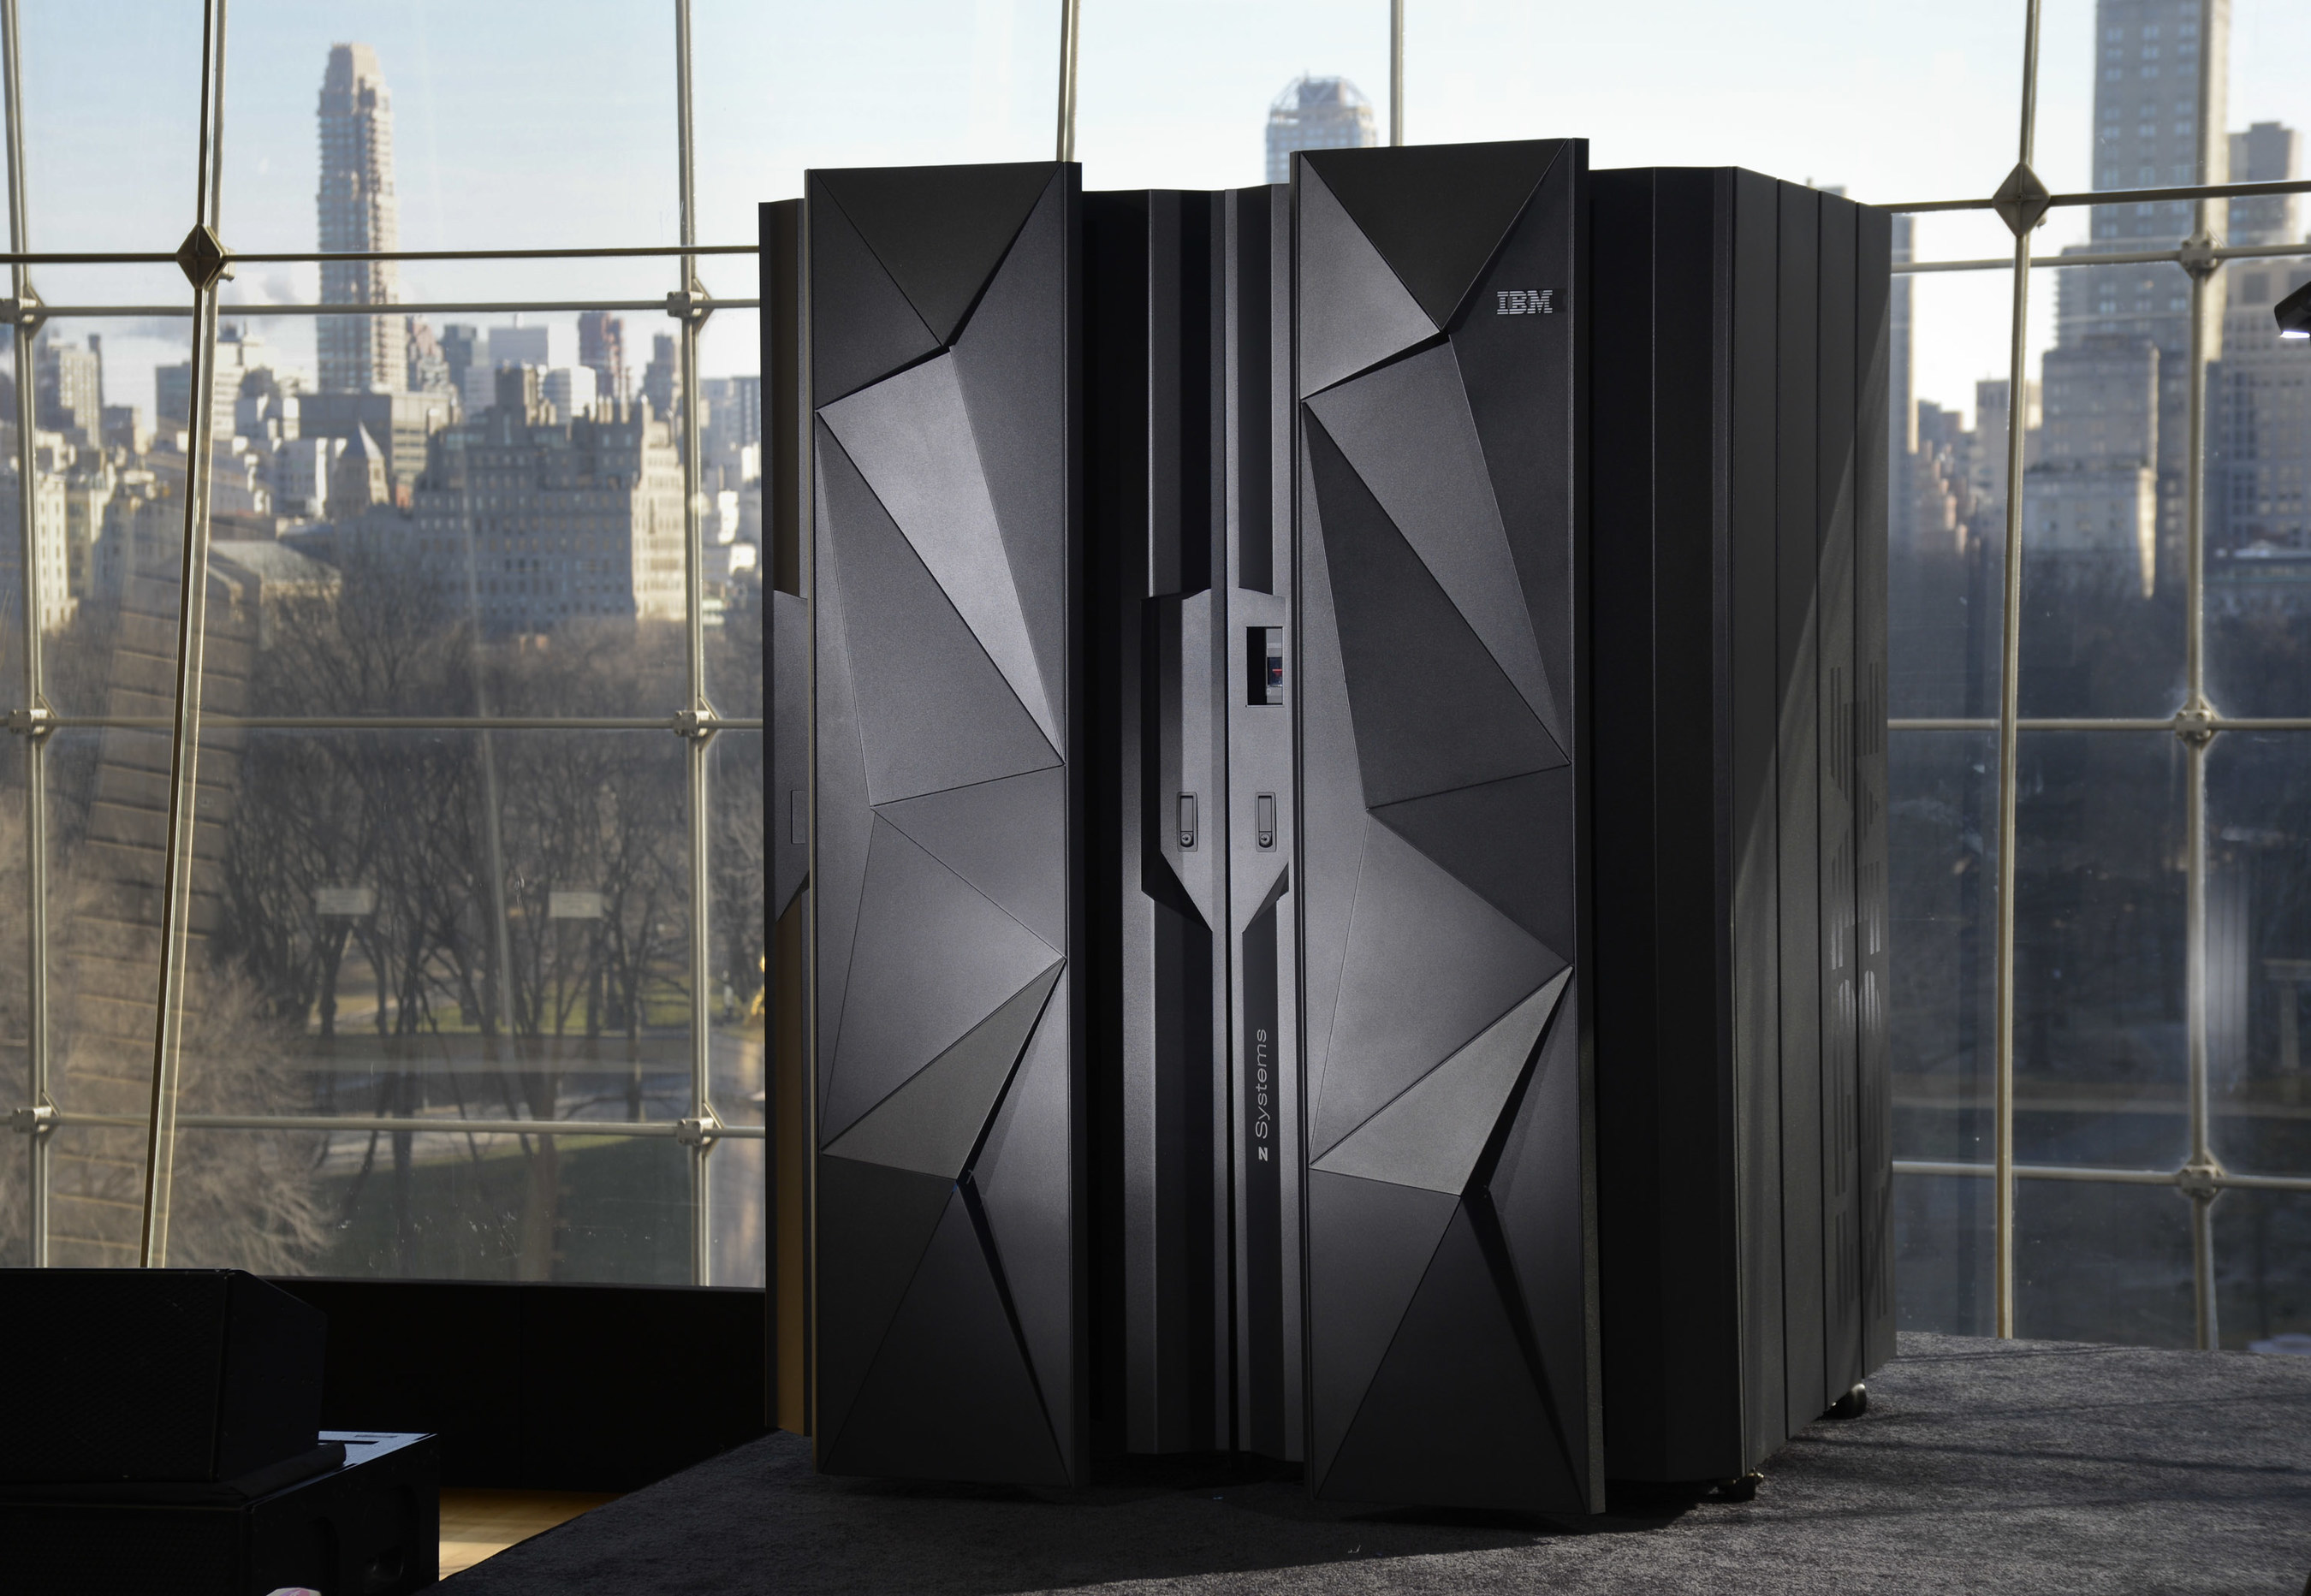 IBM unveiled its new z13 mainframe, one of the most sophisticated computer systems ever built. It culminates a $1 billion investment, five years of development, and includes more than 500 new patents and represents a collaboration with over 60 clients, underscoring IBM's commitment to providing higher-value, innovative technology for clients. (Augusto Menezes/Feature Photo Service for IBM)